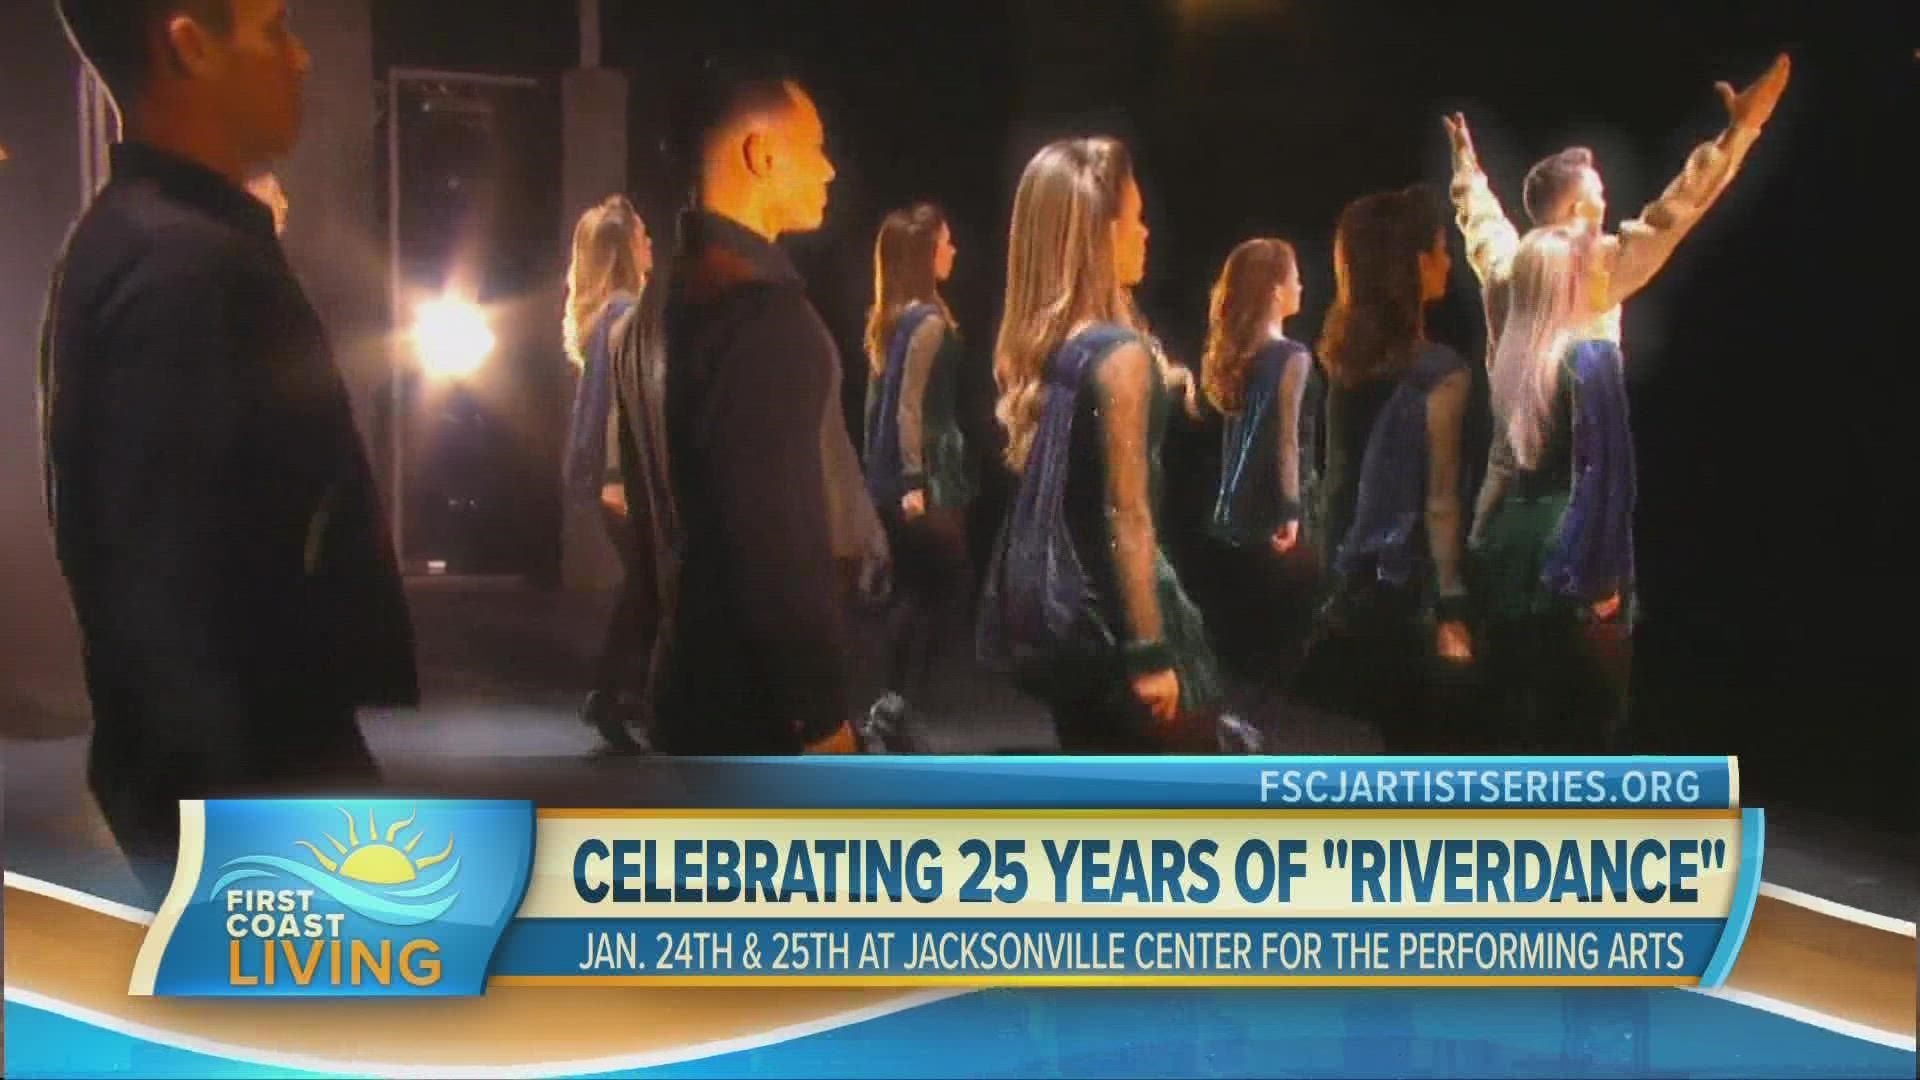 Don't miss the 25th anniversary celebration at the Jacksonville Center for the Performing Arts Jan. 24th and 25th!